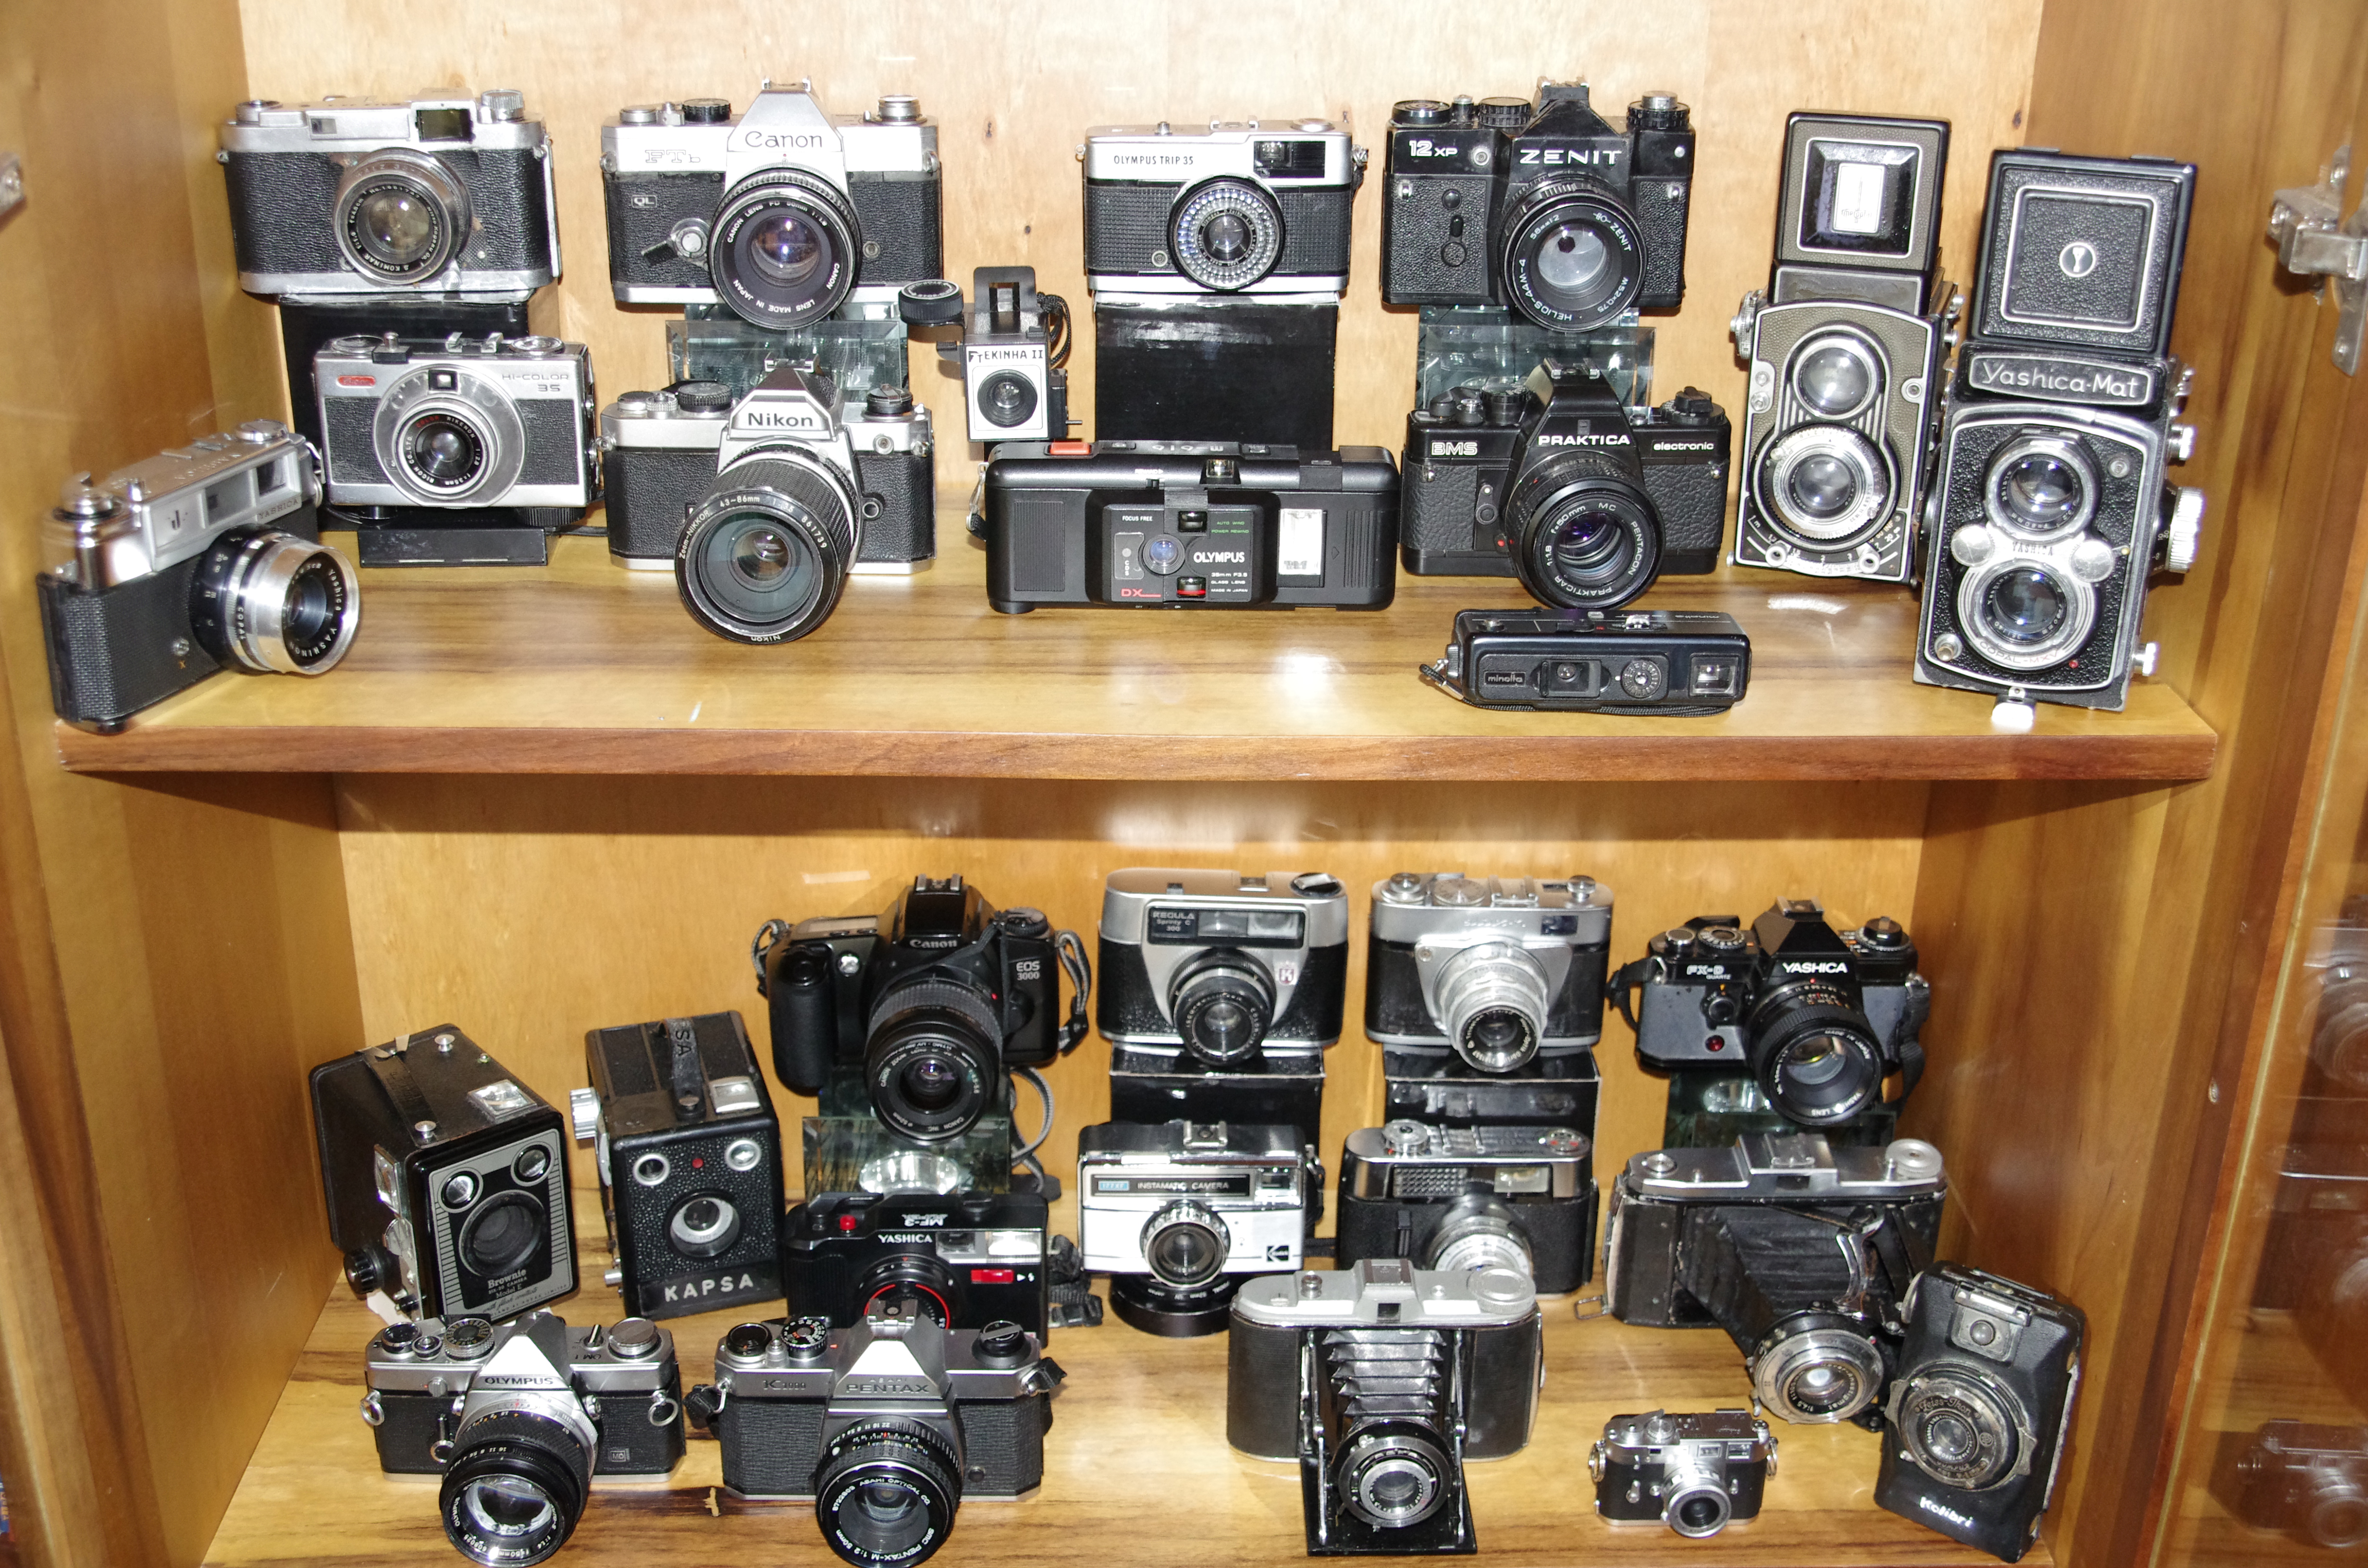 File:Old cameras collection.JPG - Wikimedia Commons